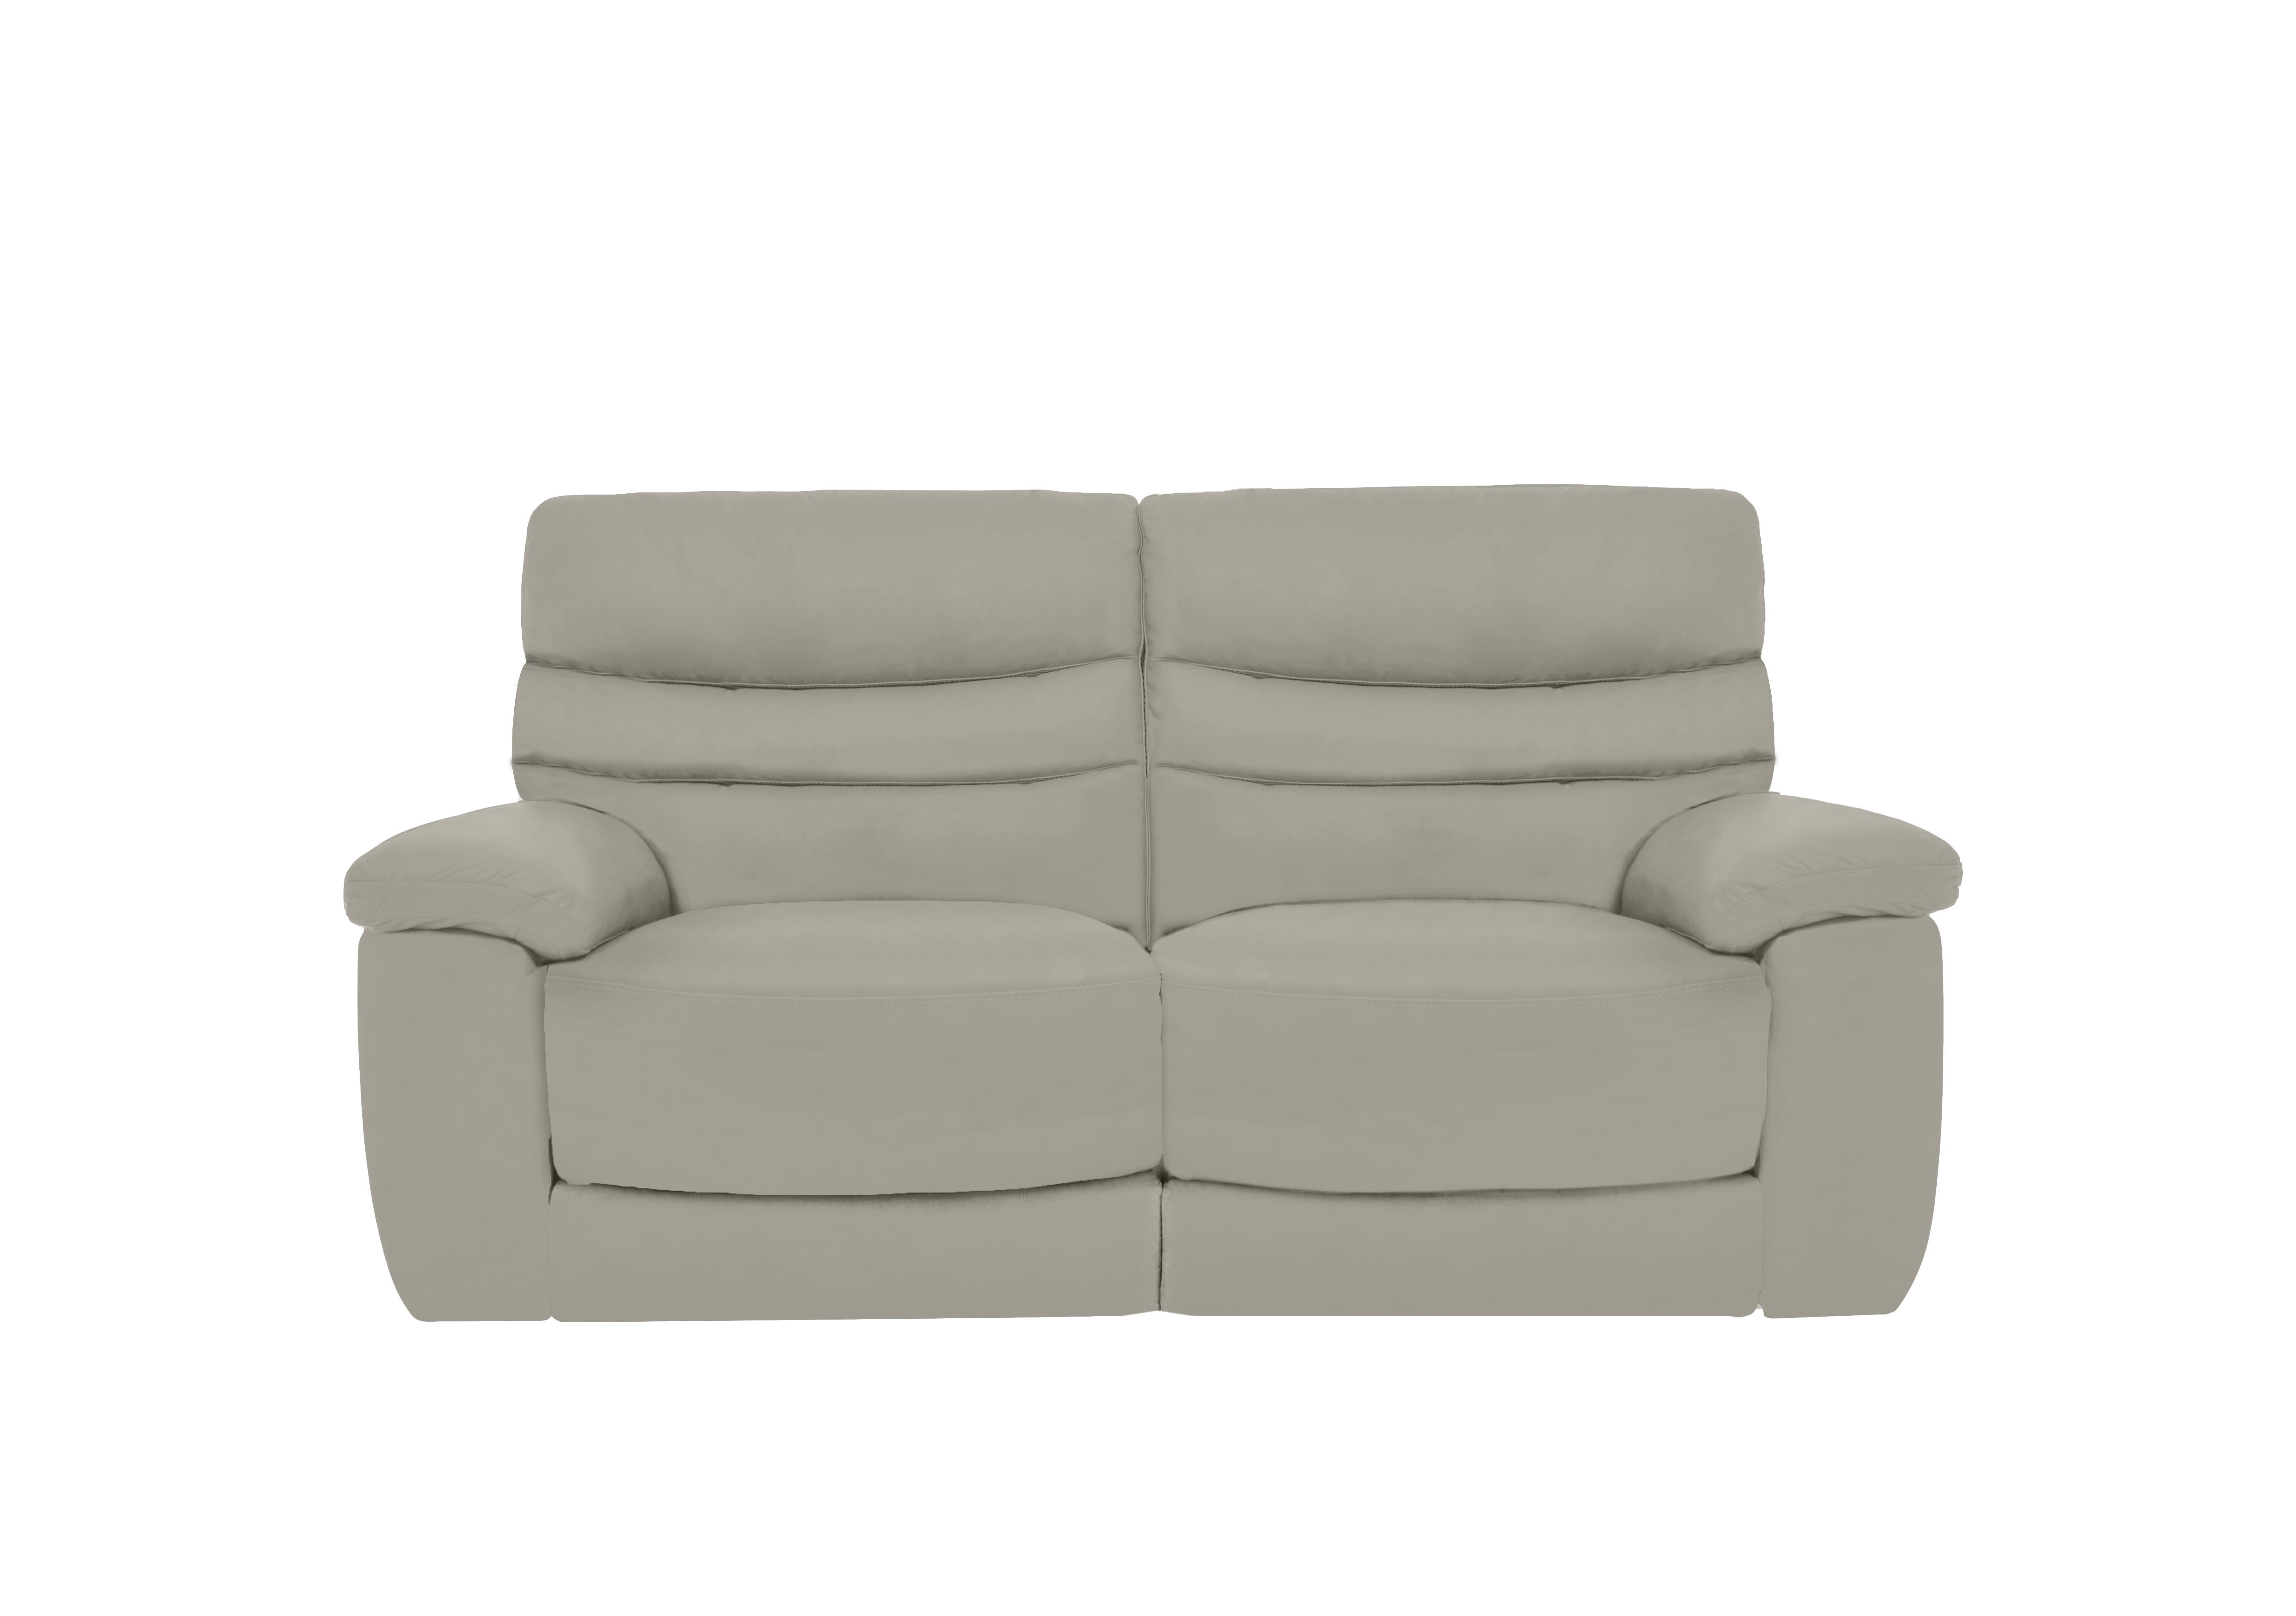 Nimbus 2 Seater Leather Power Recliner Sofa with Power Headrests in Bx-251e Grey on Furniture Village